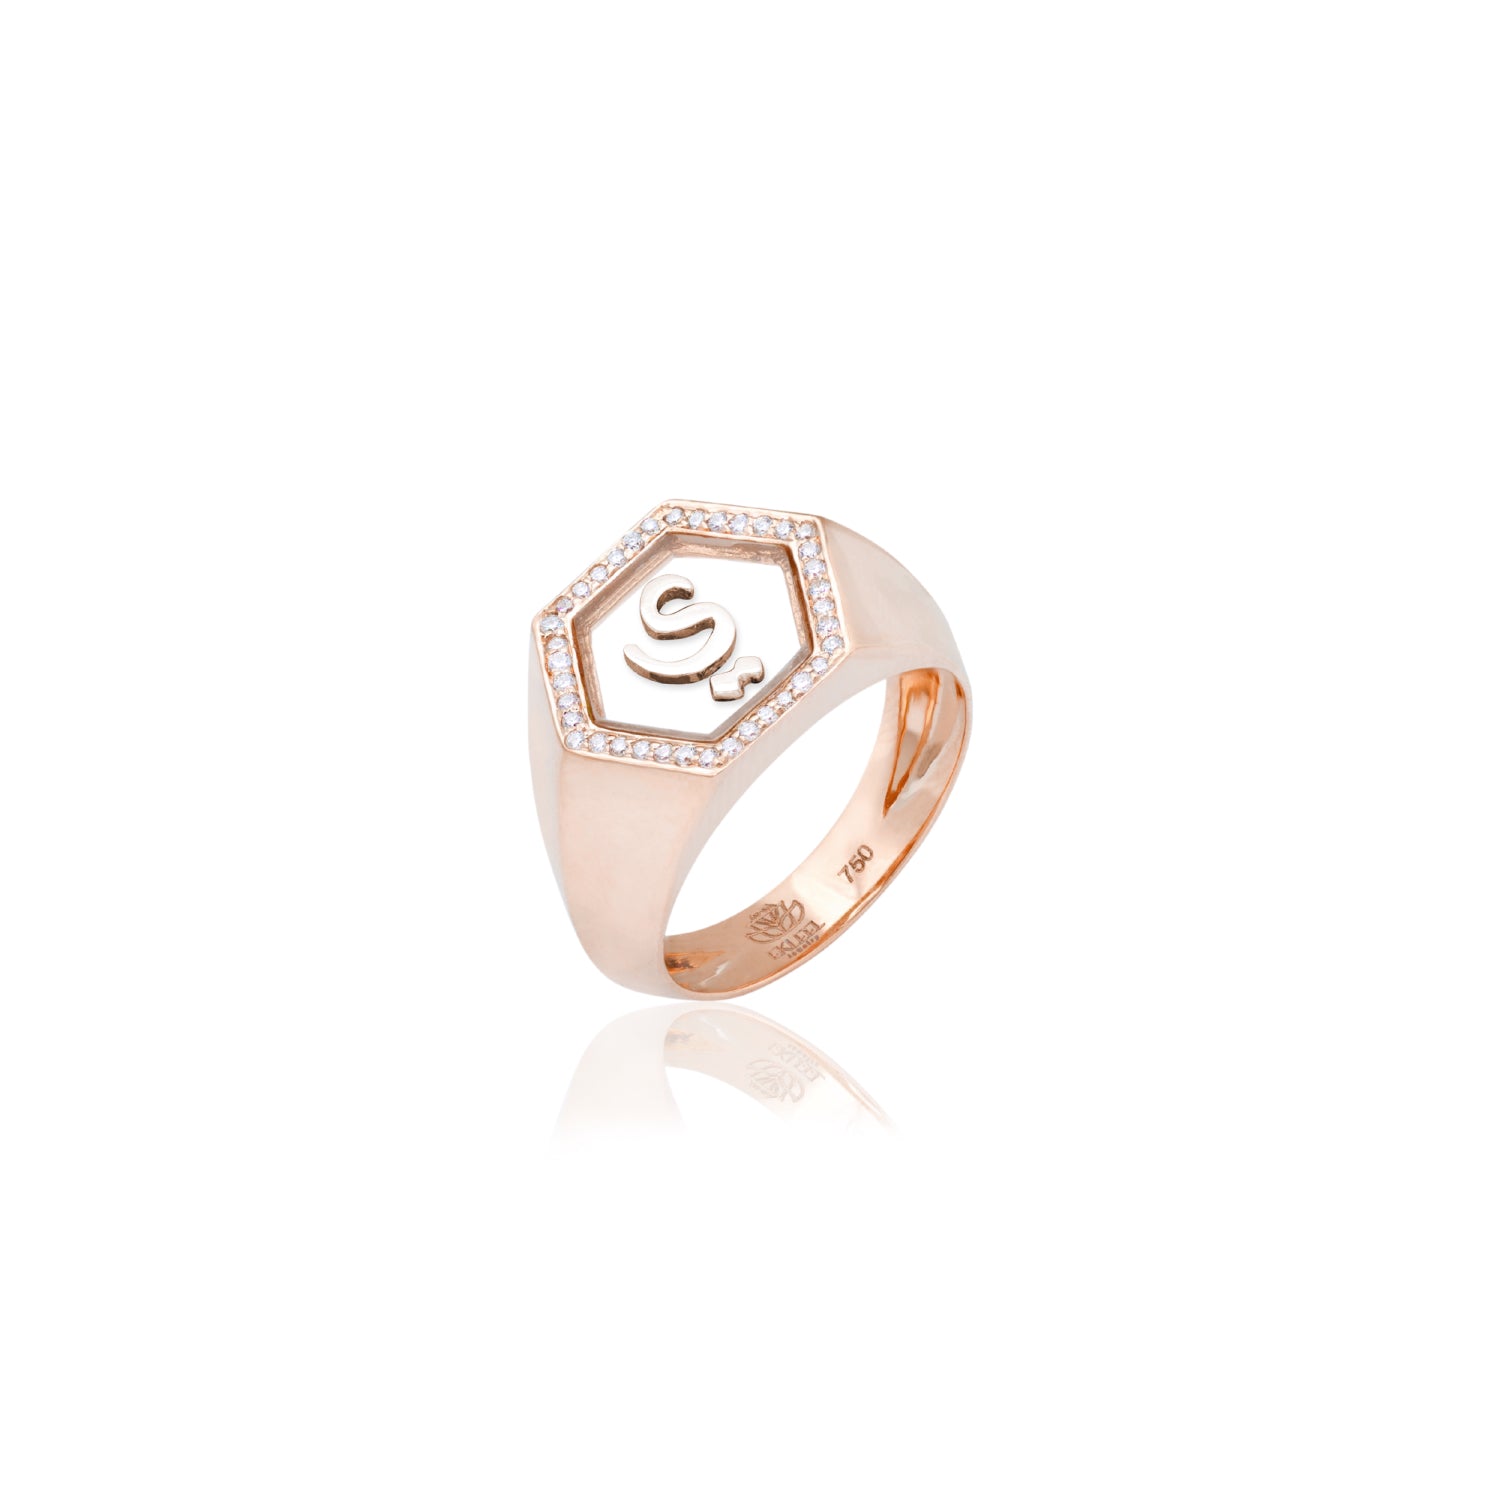 Qamoos 2.0 Letter ي Plexiglass and Diamond Signet Ring in Rose Gold